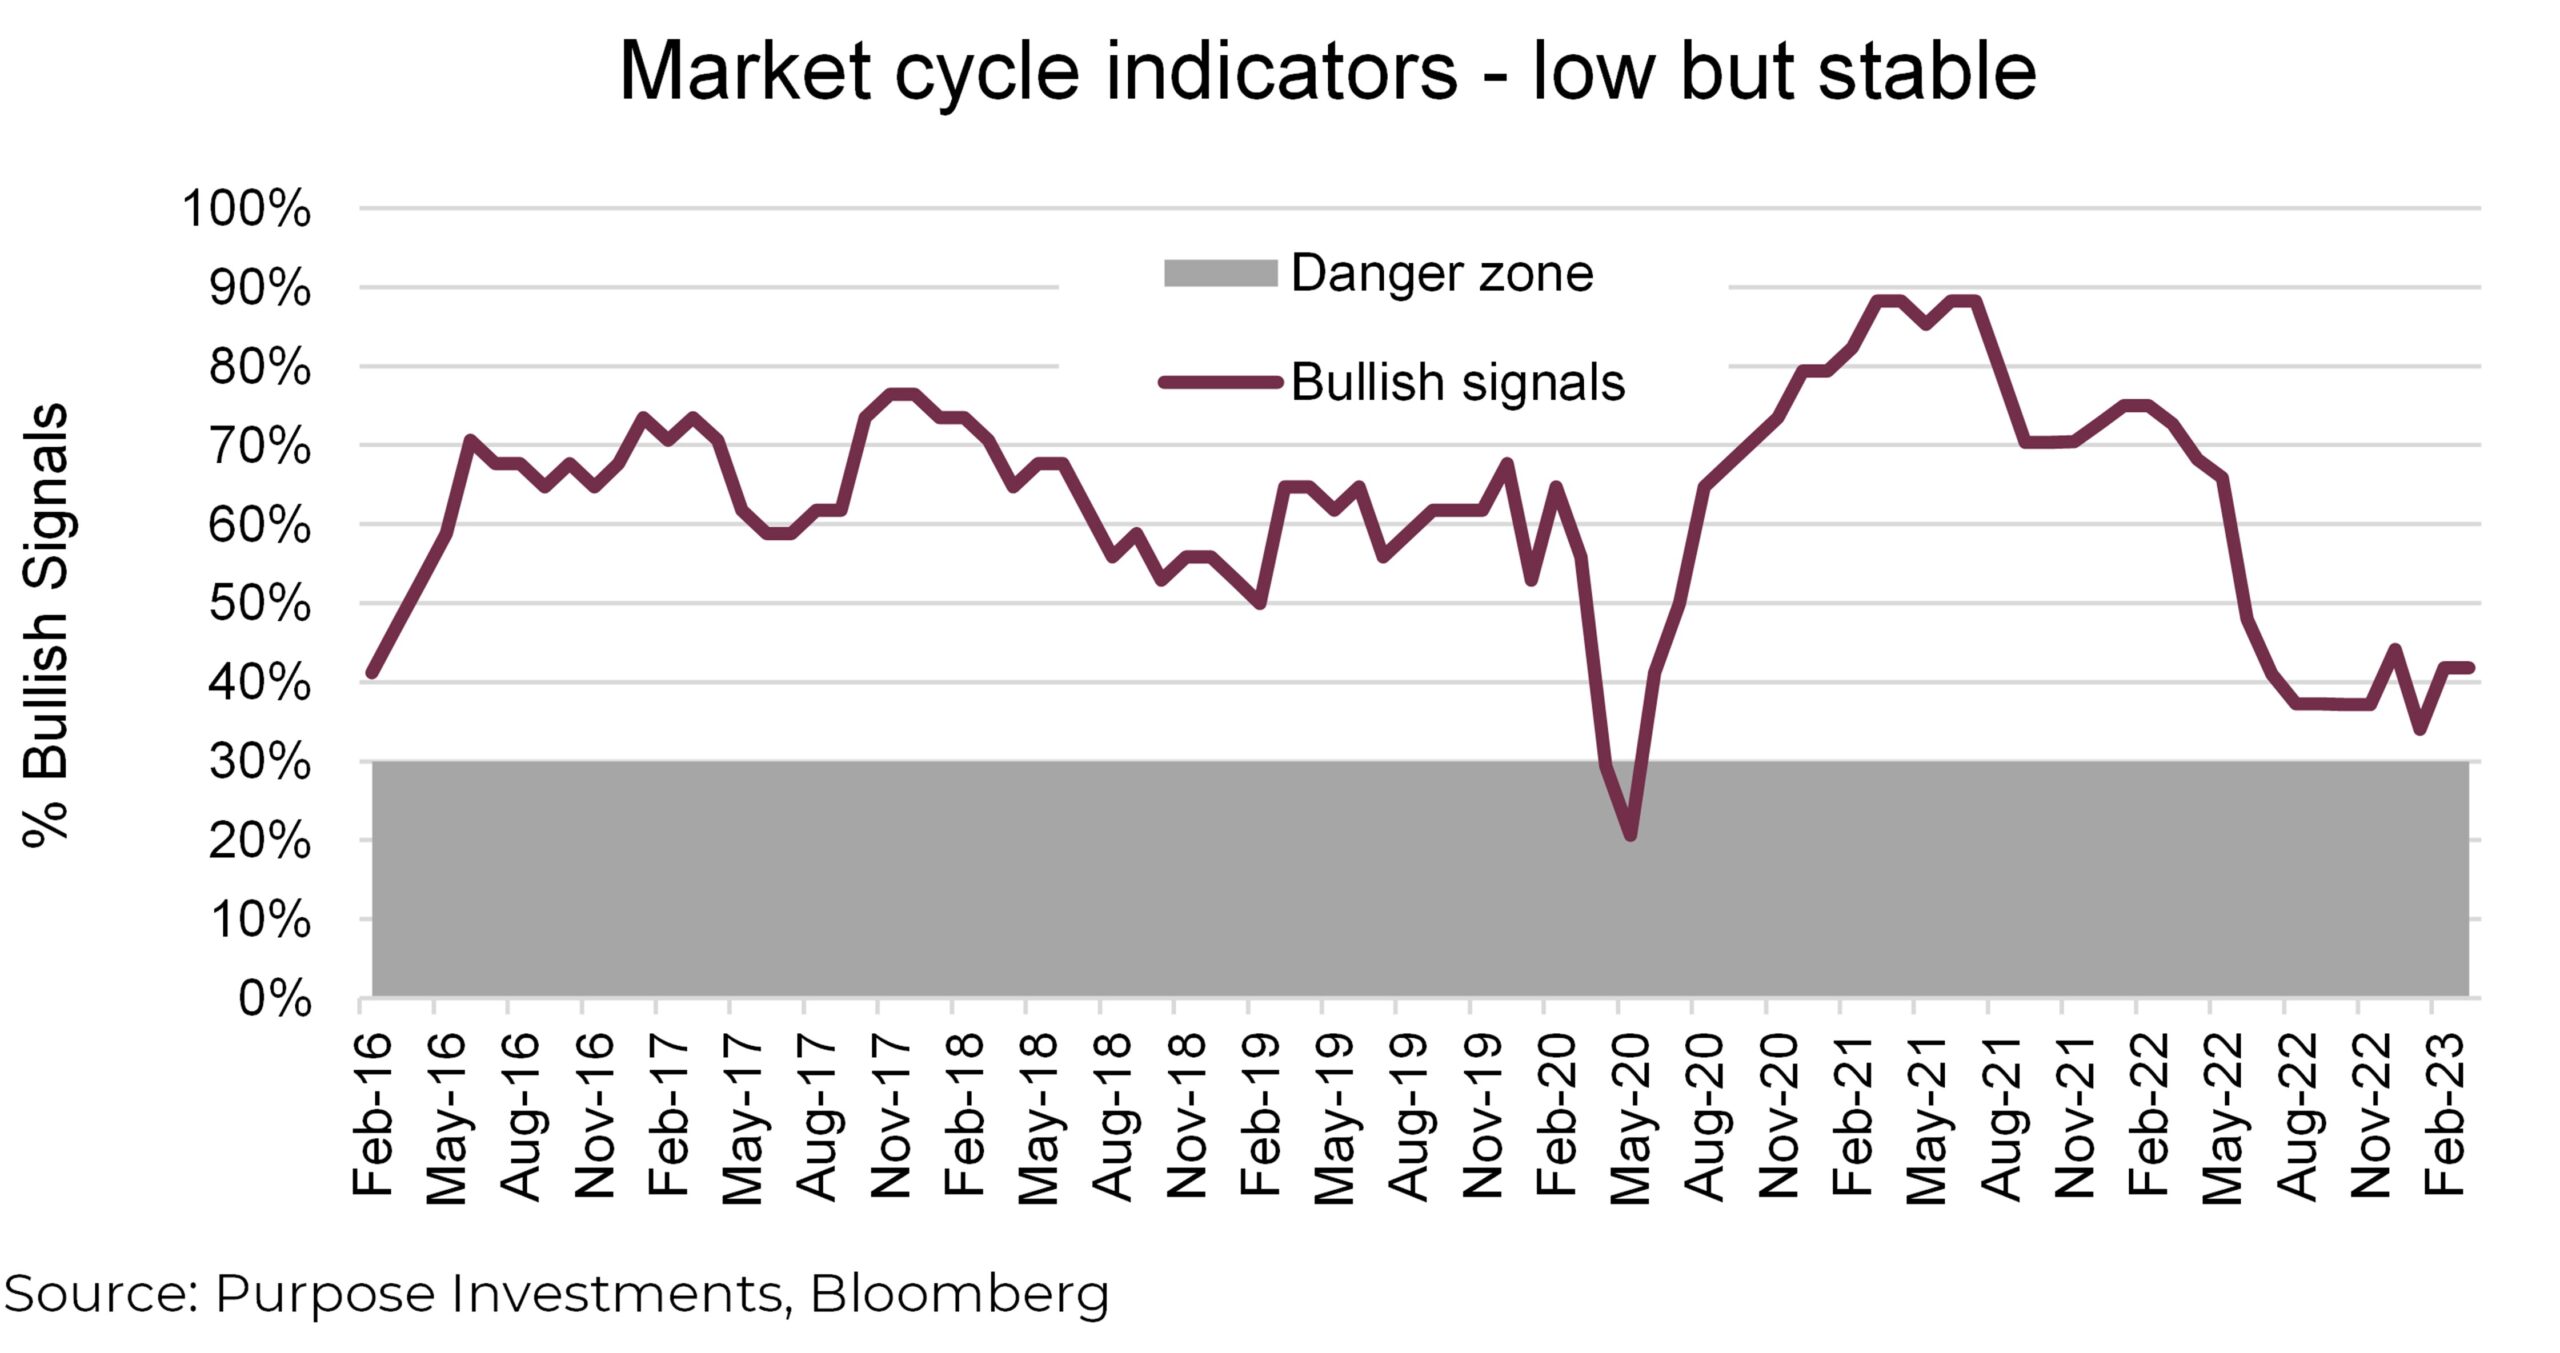 Market cycle indicators - low but stable